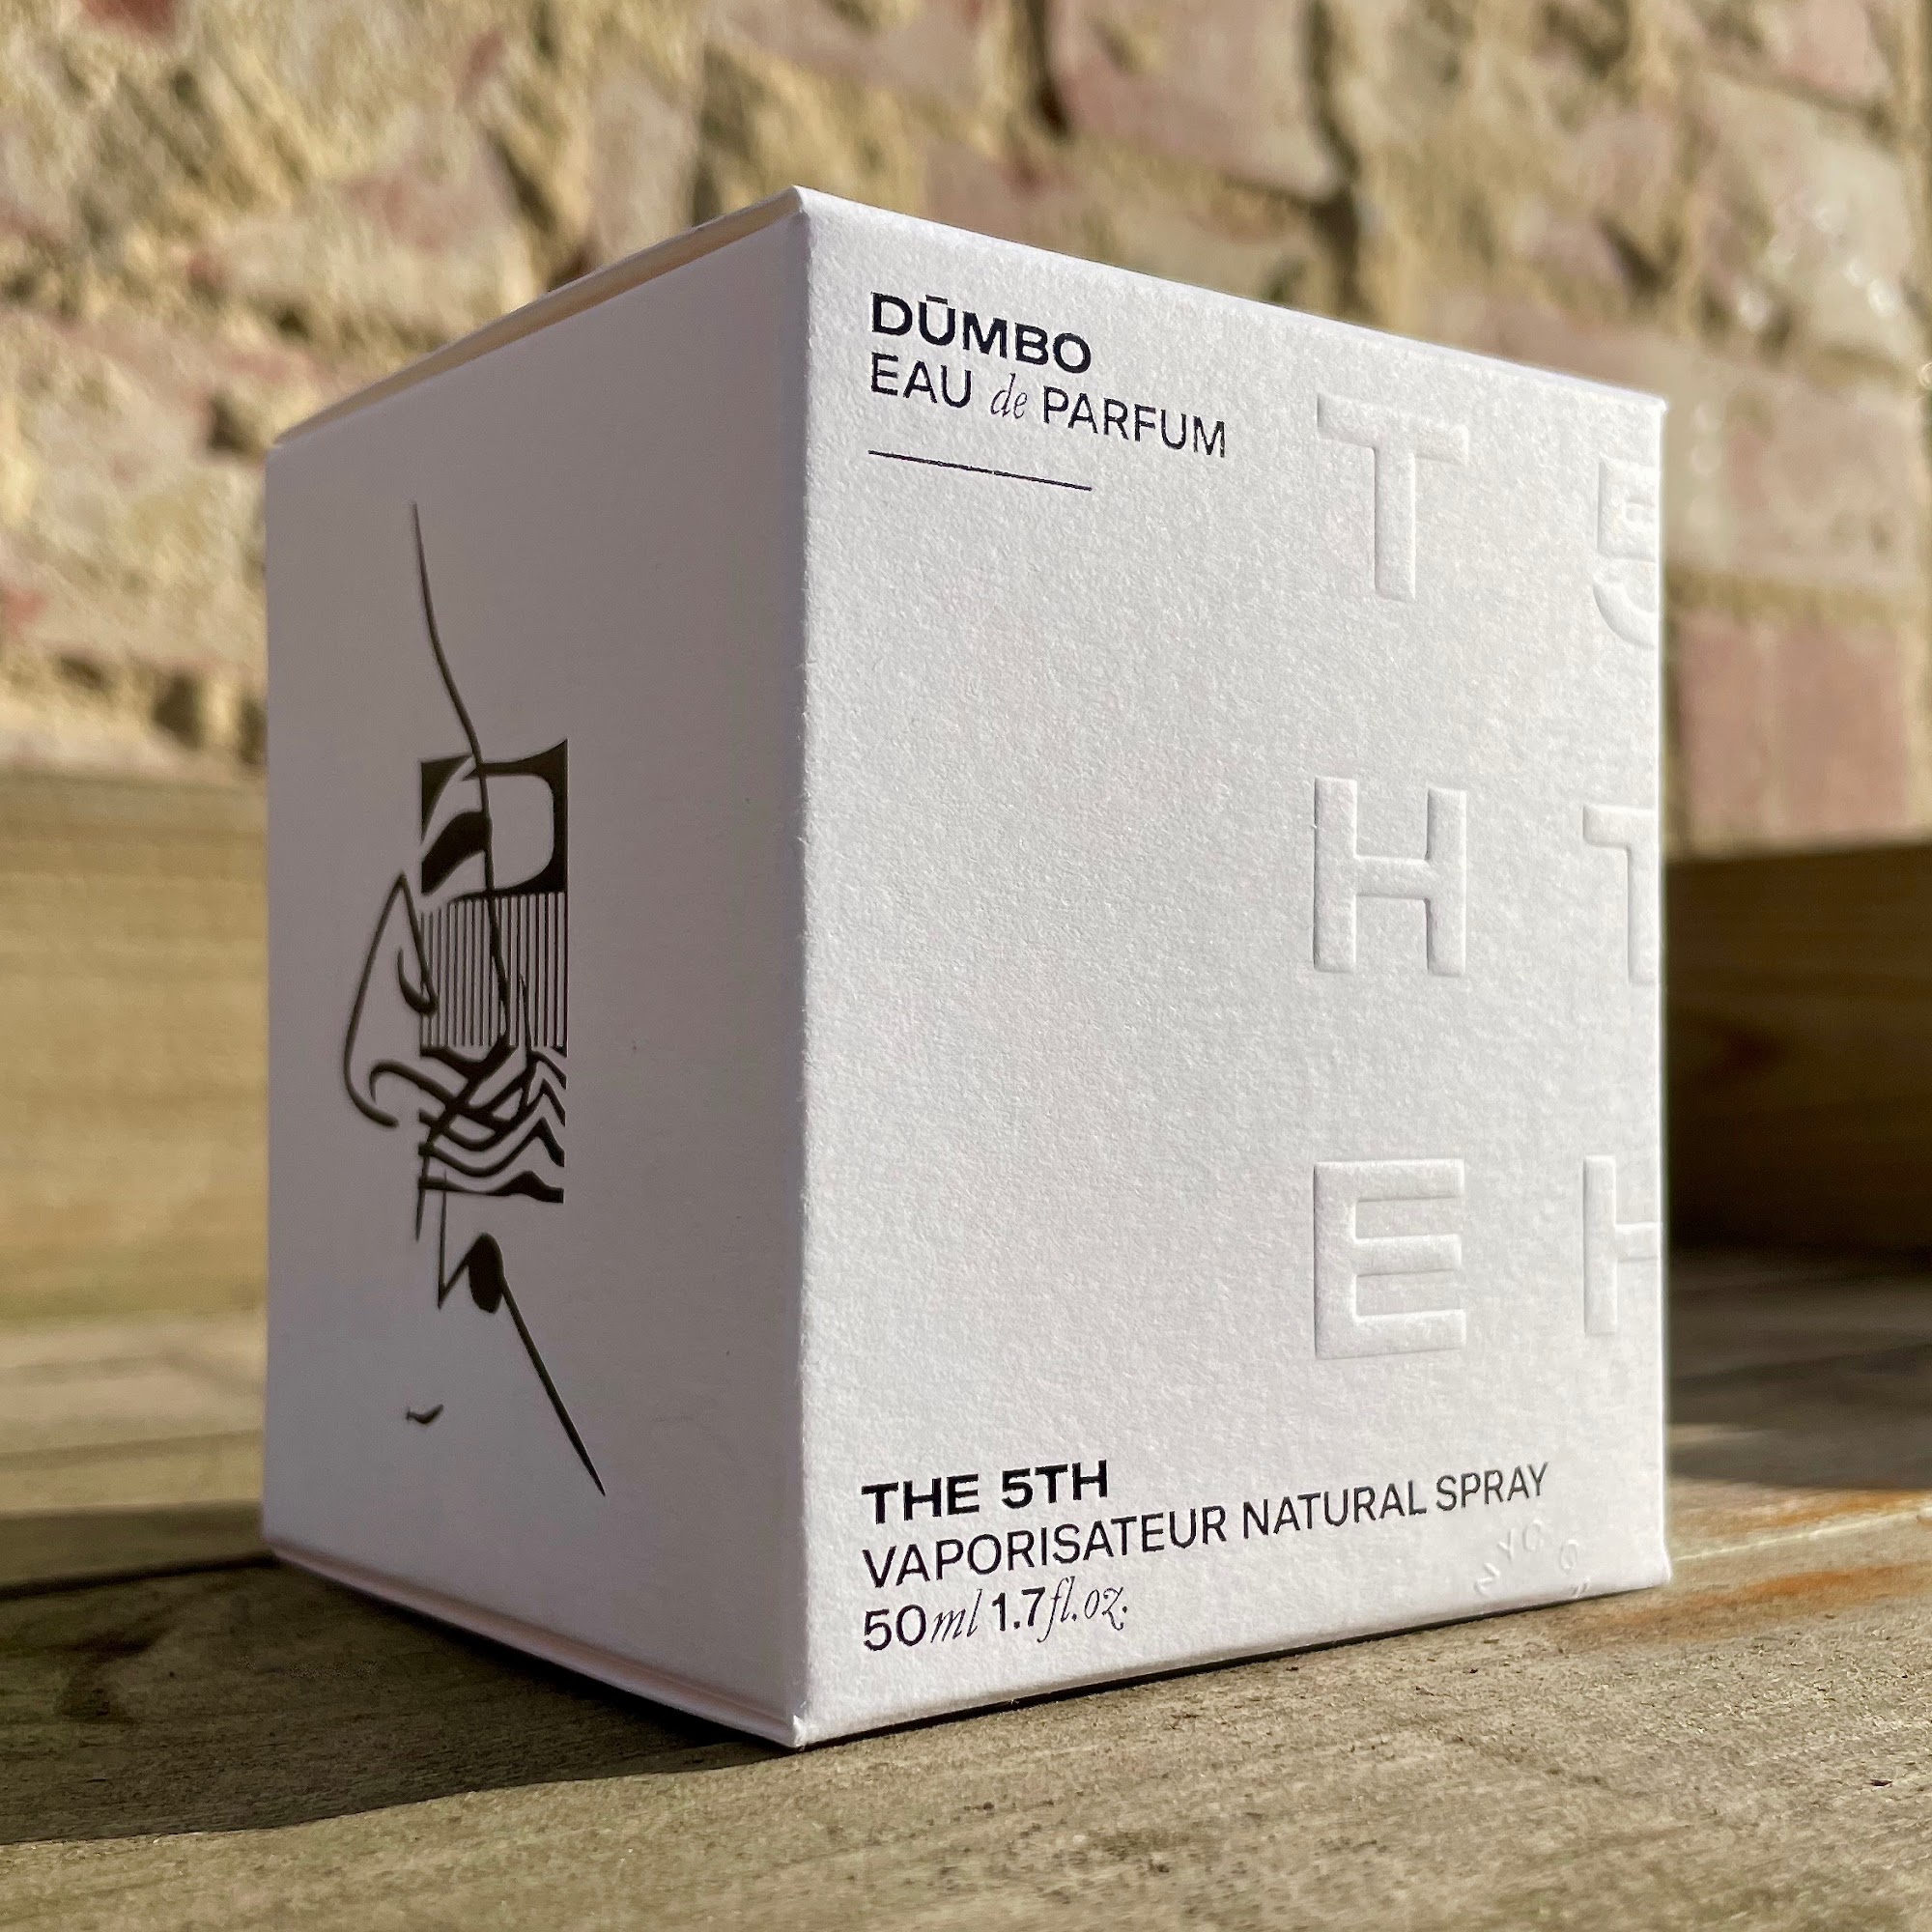 DŪMBO perfume bottle box from the company called THE 5TH